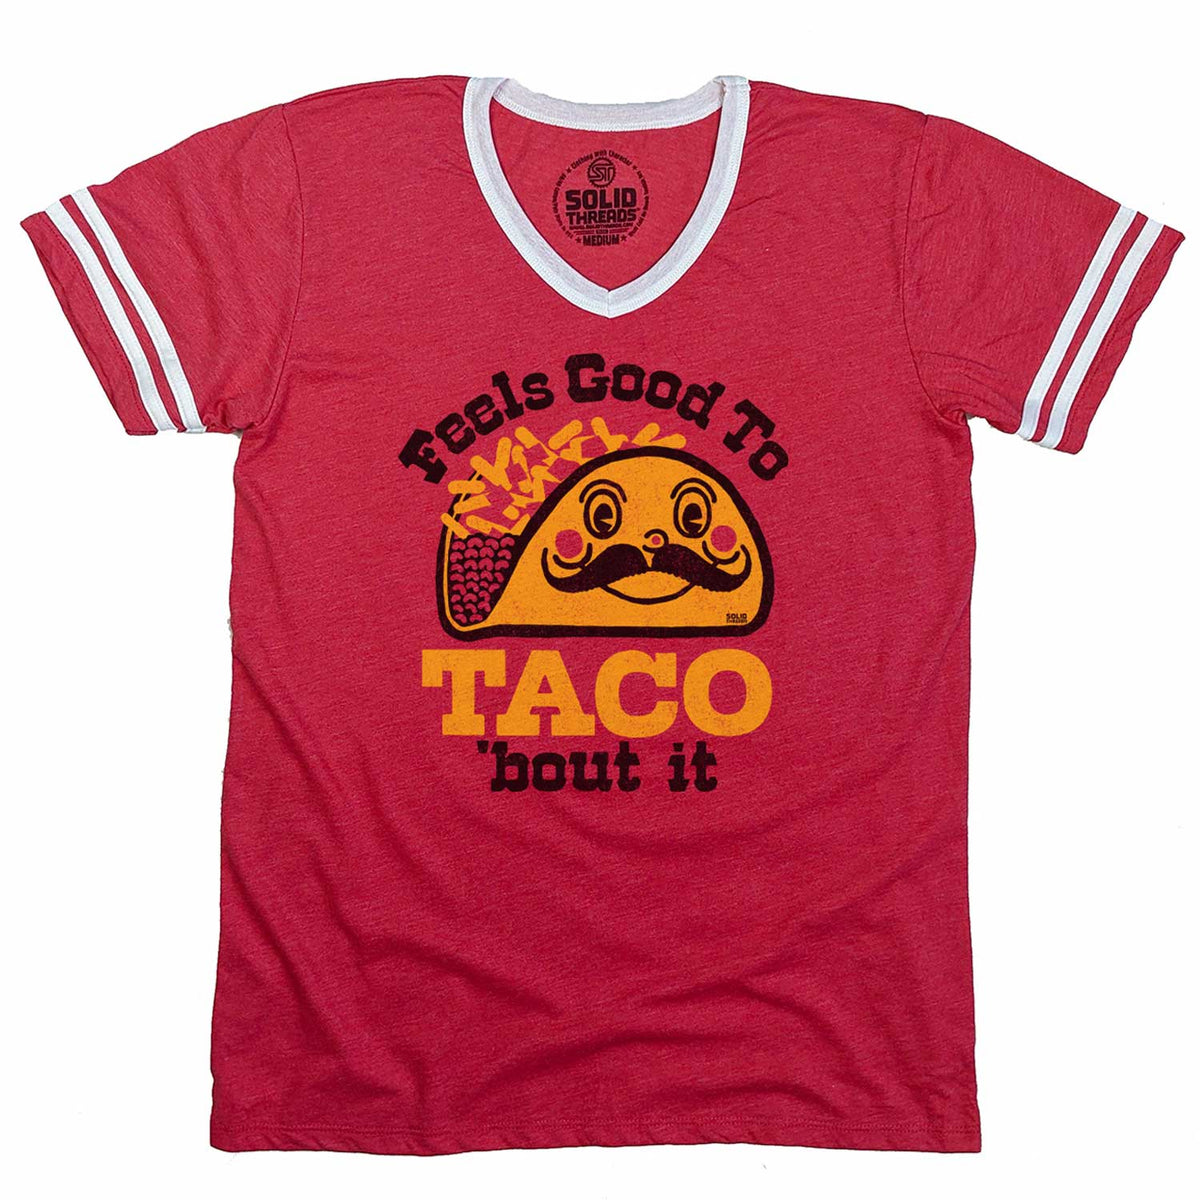 Men&#39;s Feels Good To Taco Bout It Graphic V-Neck Tee | Funny Mexican Food T-Shirt | Solid Threads